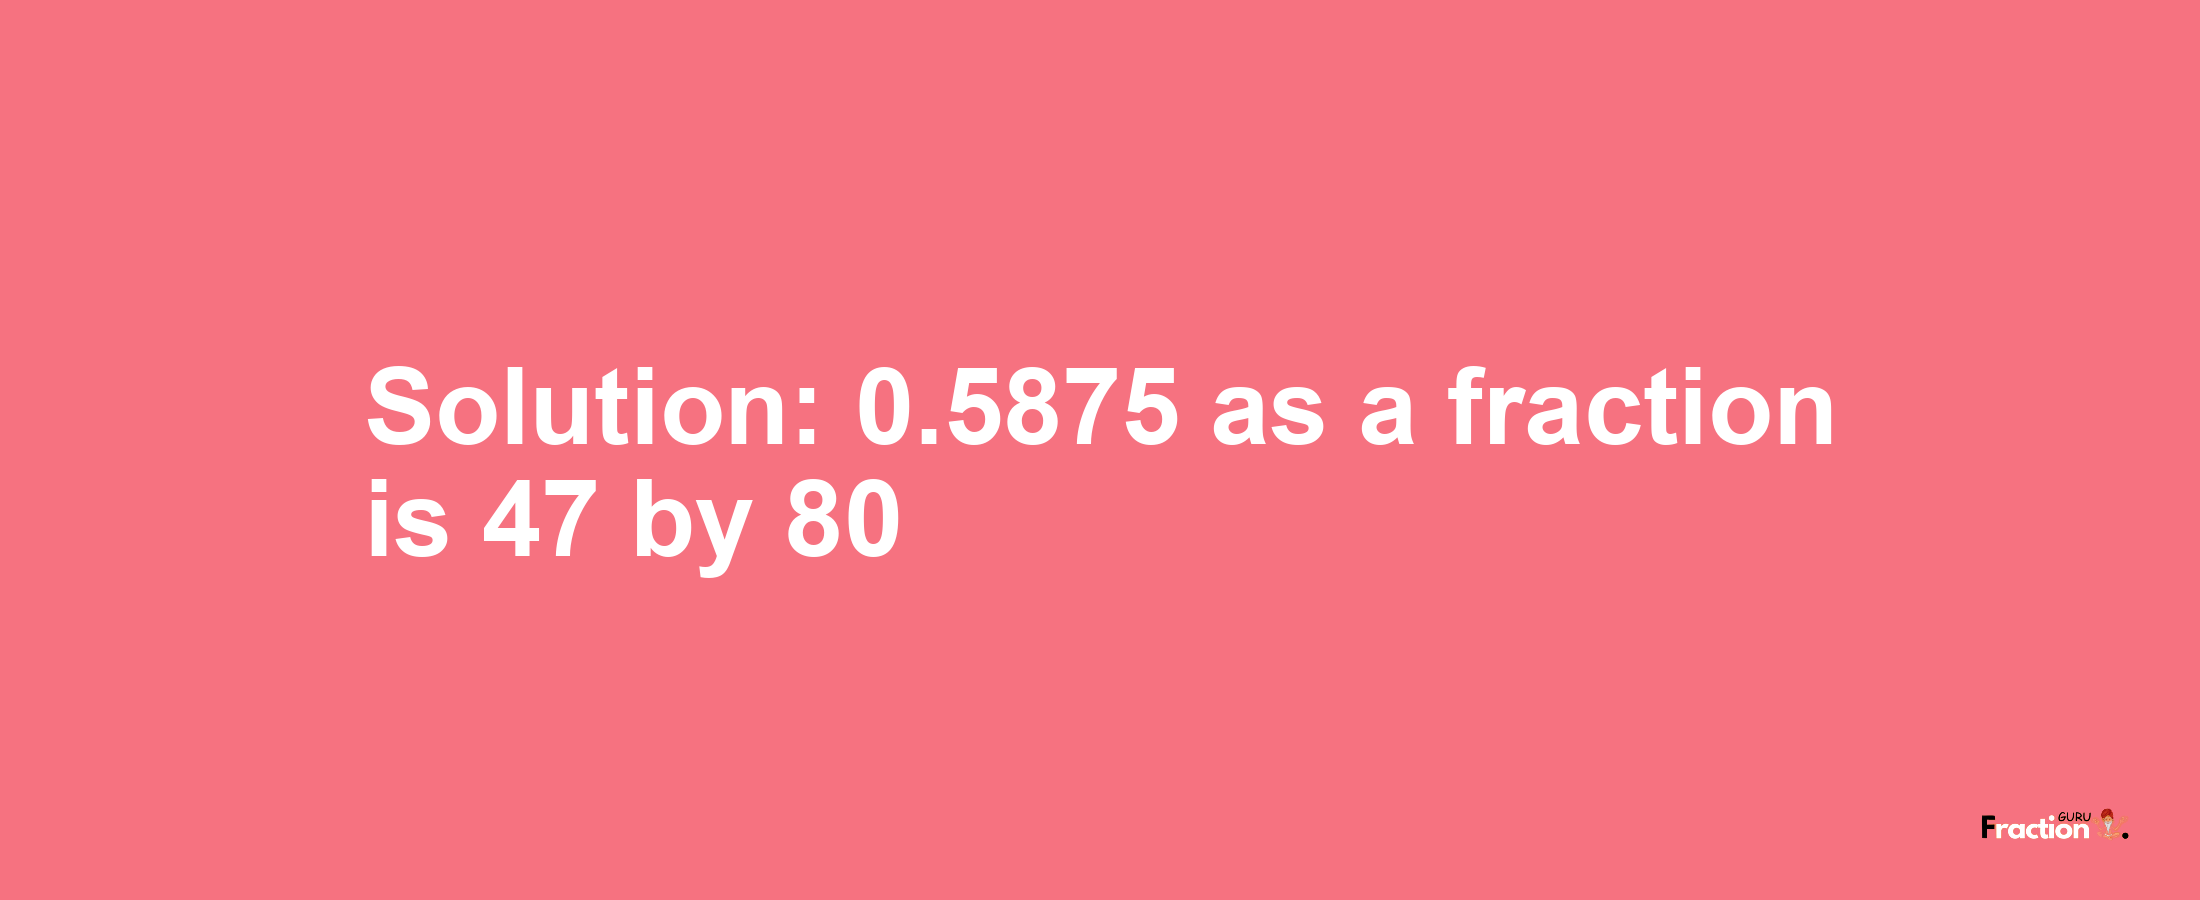 Solution:0.5875 as a fraction is 47/80